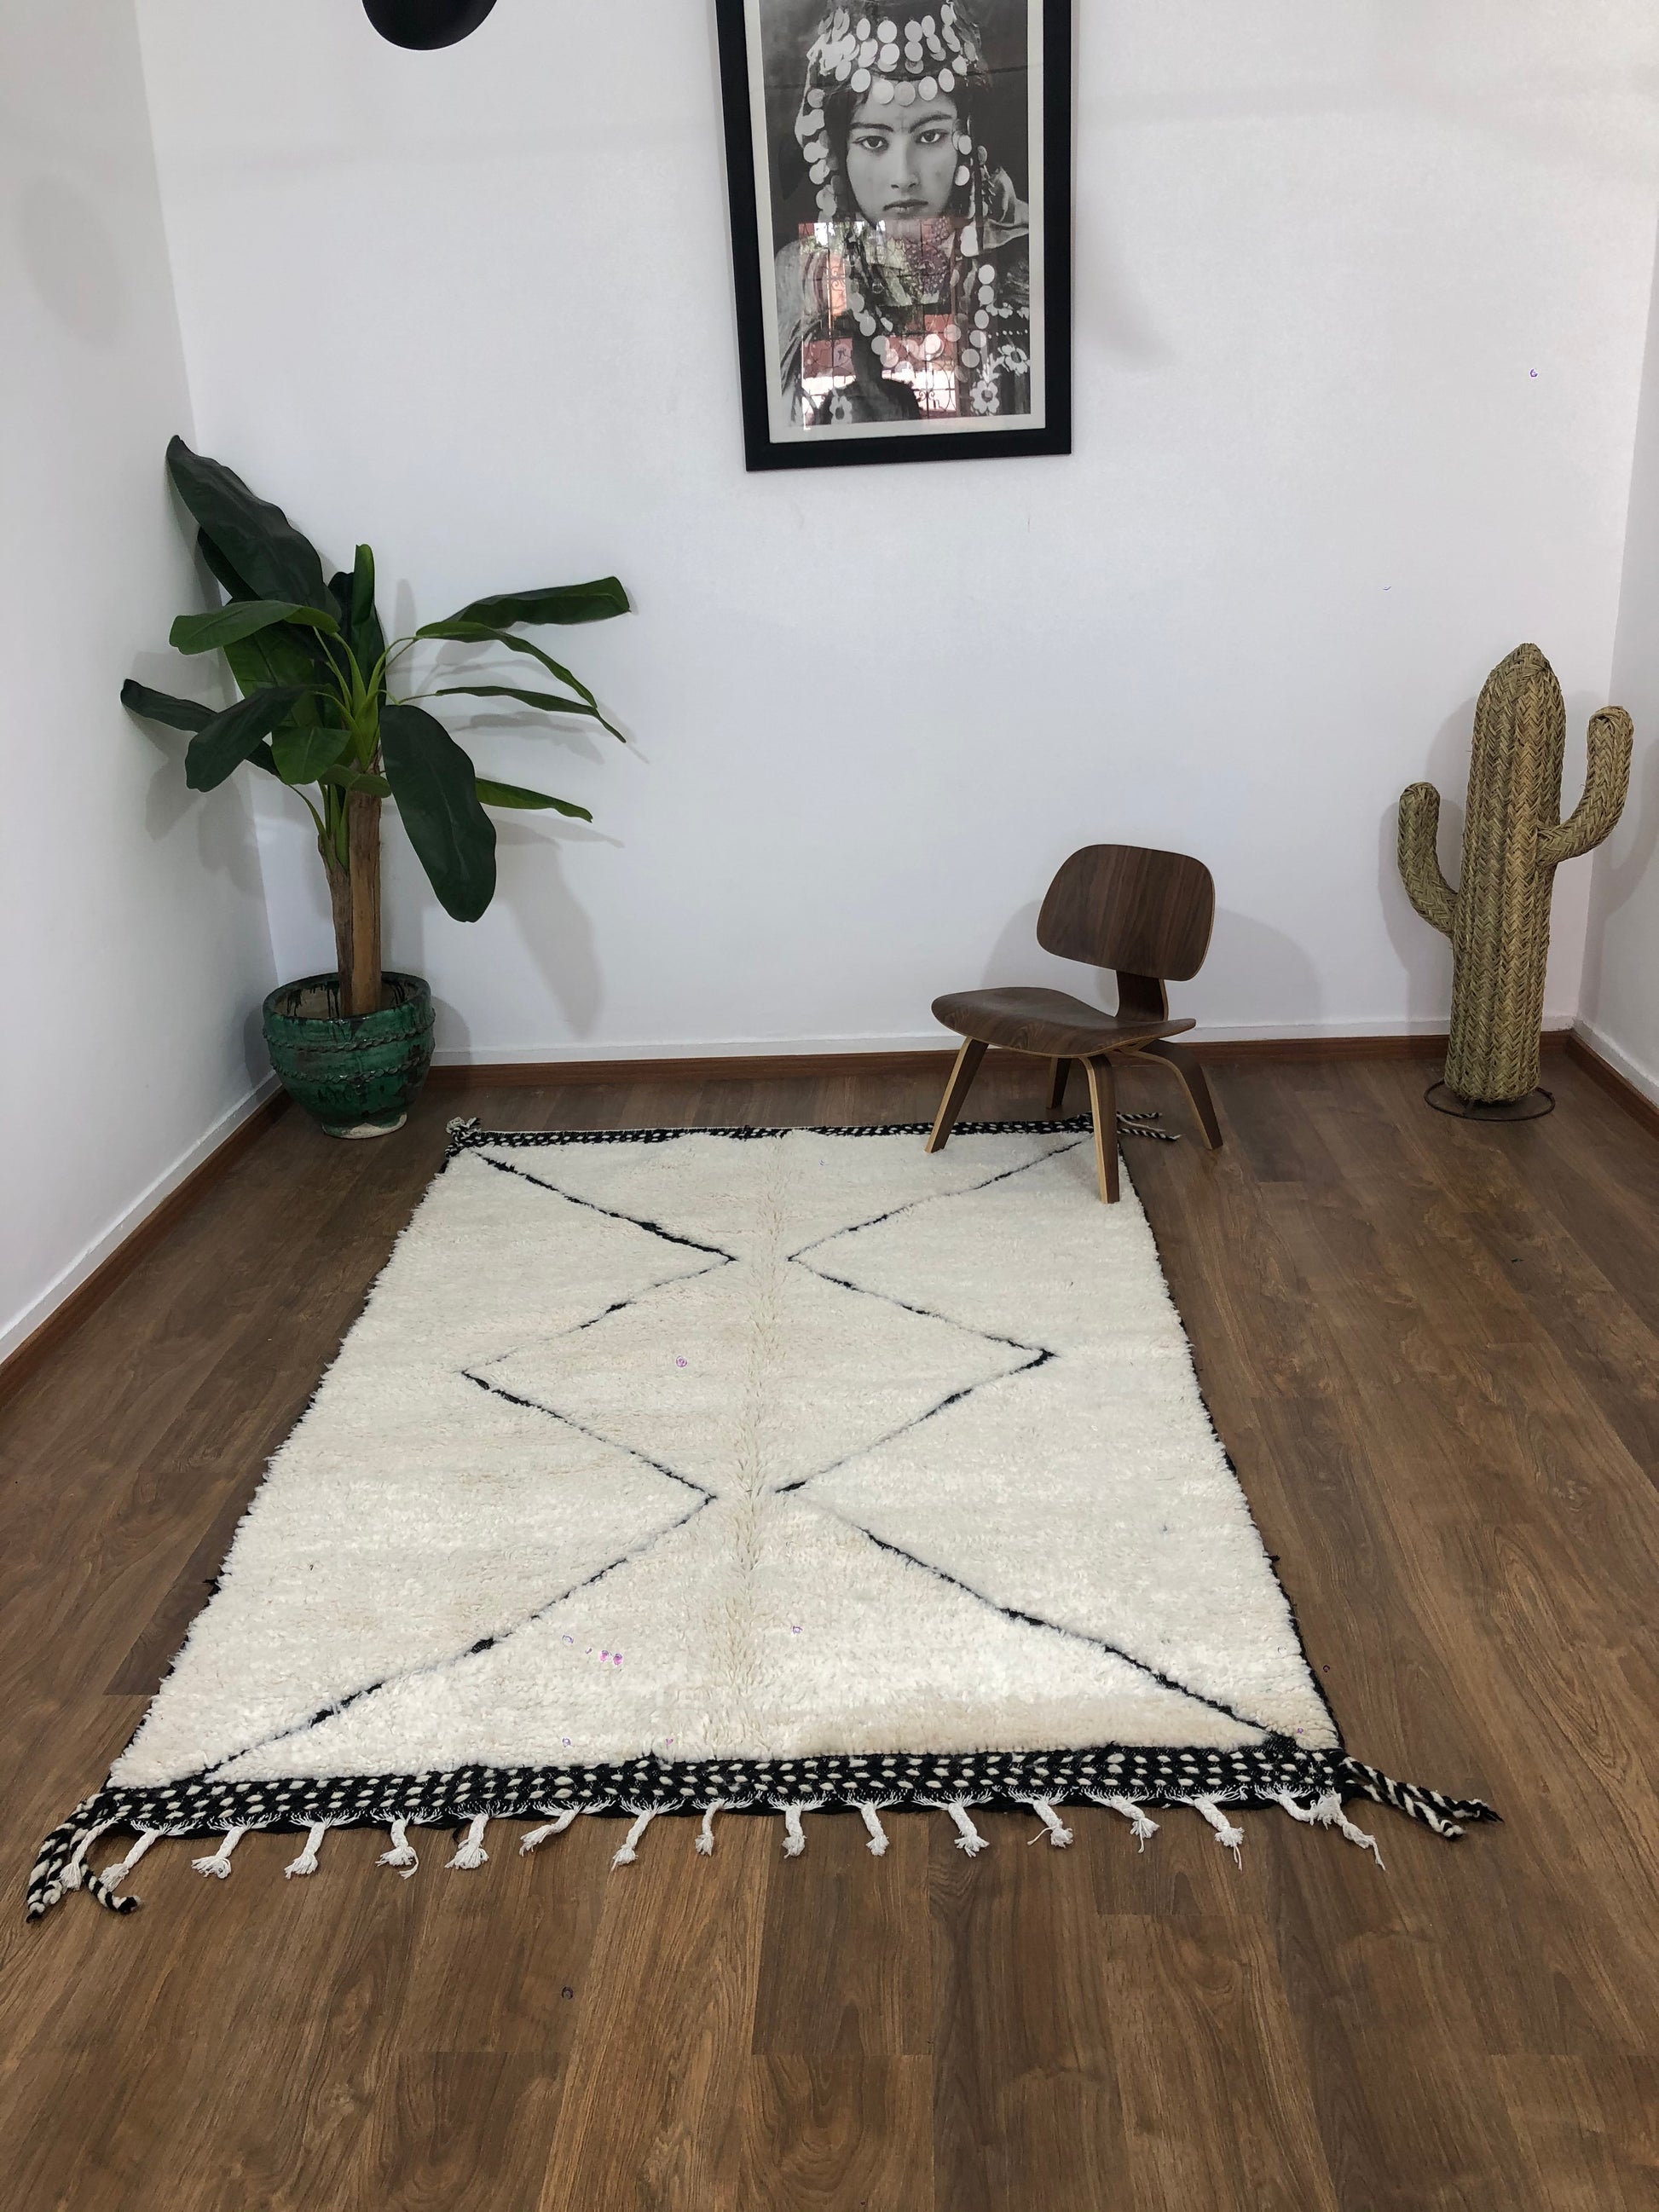 Handmade Moroccan Berber Beni Ourain Rug - 7.84 x 5.28 FT ( 239 x 161 Cm ) Authentic handwoven double sided carpet , Free Shipping - MarrakeshLoom